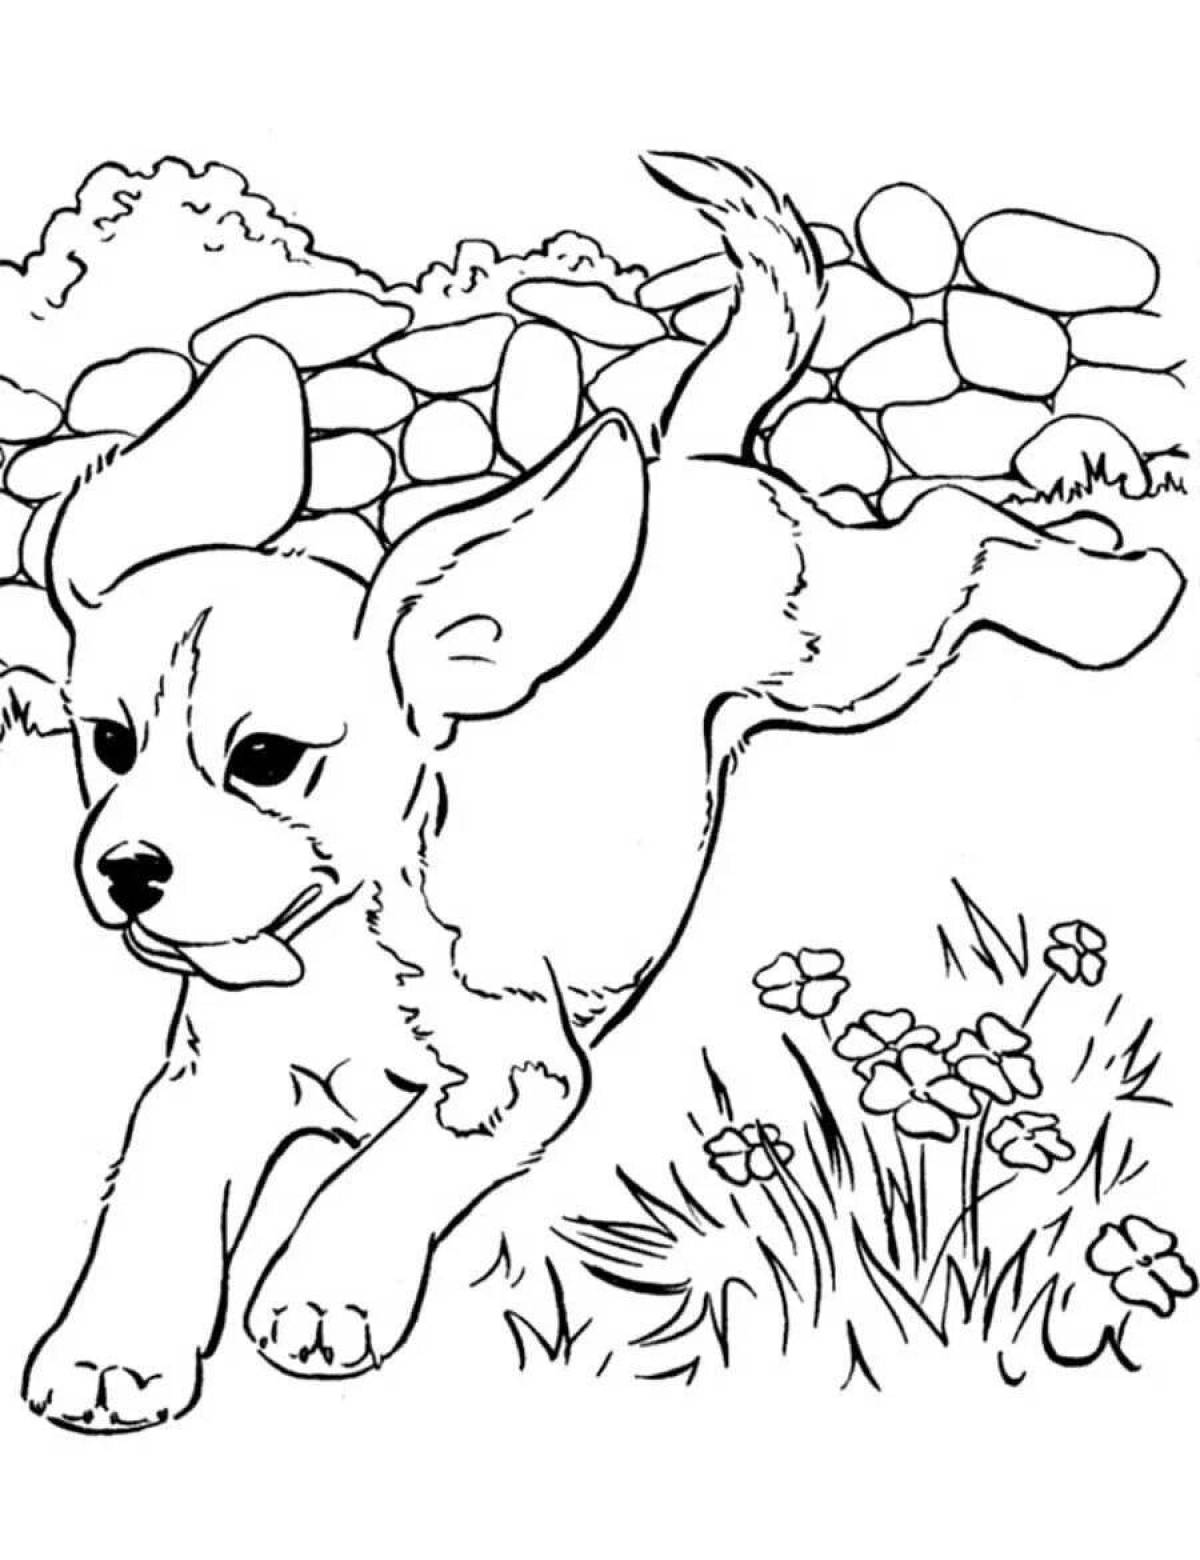 Fun animal coloring pages